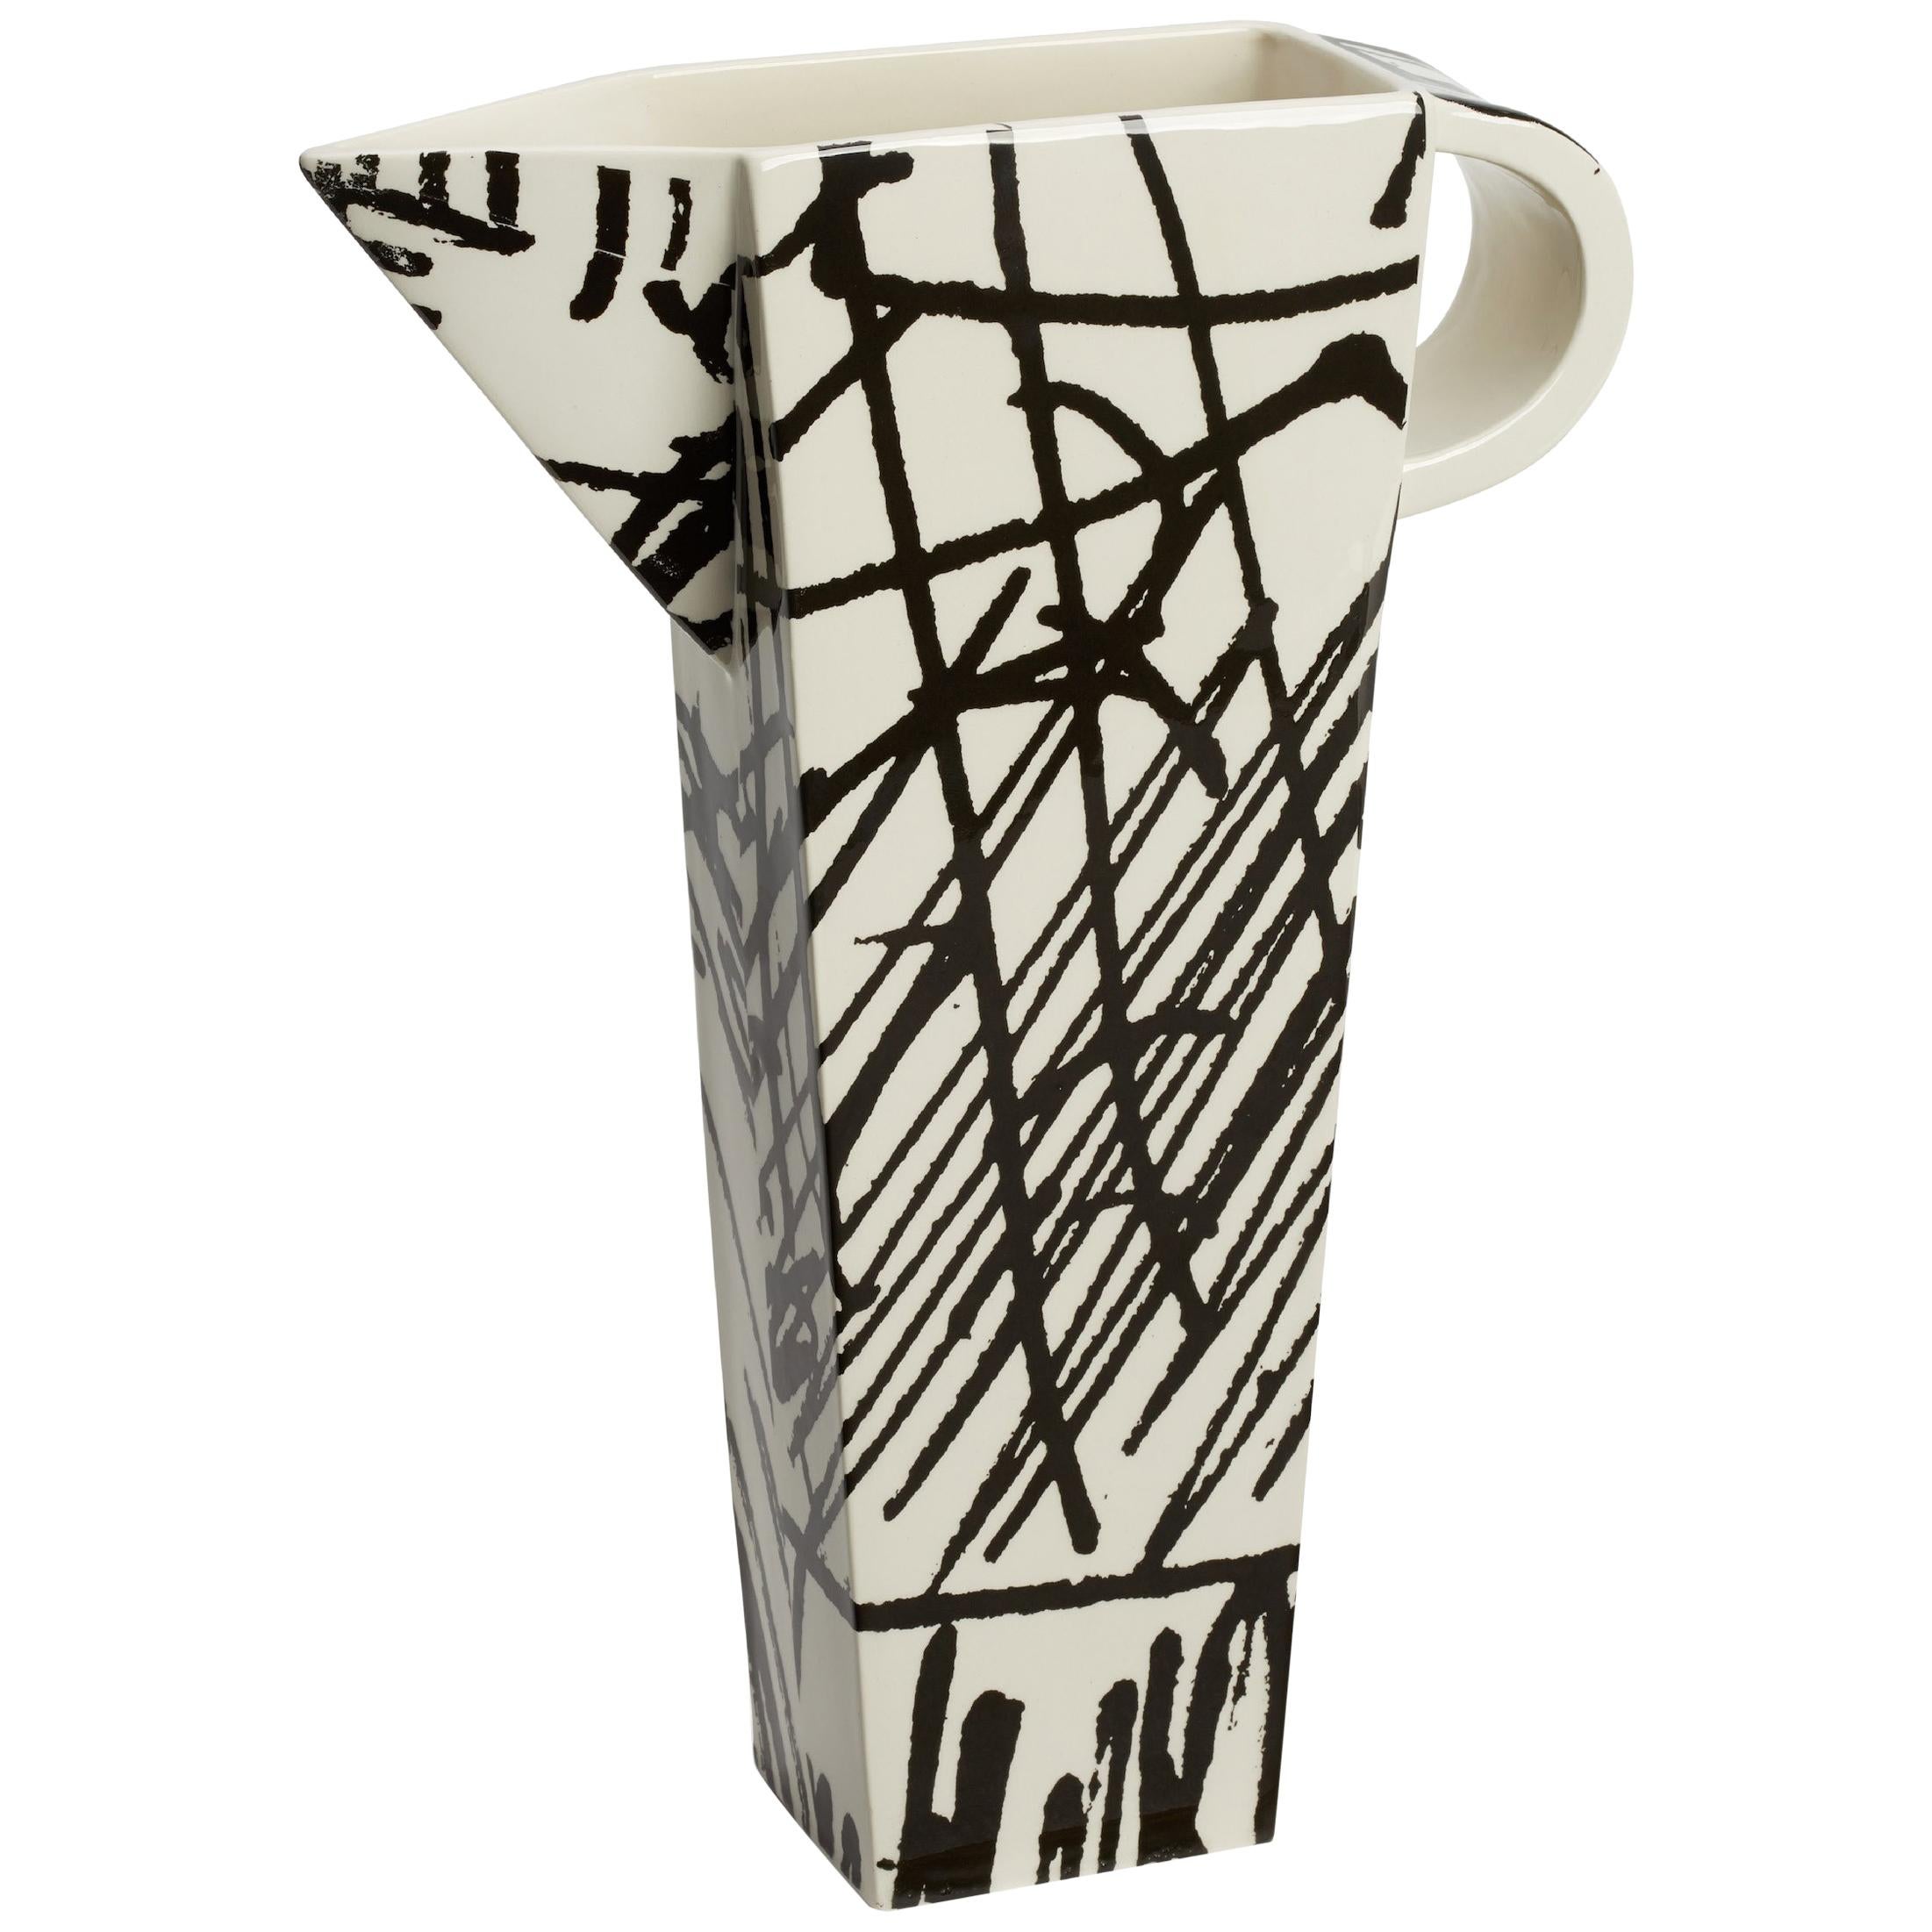 White Ceramic Production Jug 02 with Black Silk Screen Decals